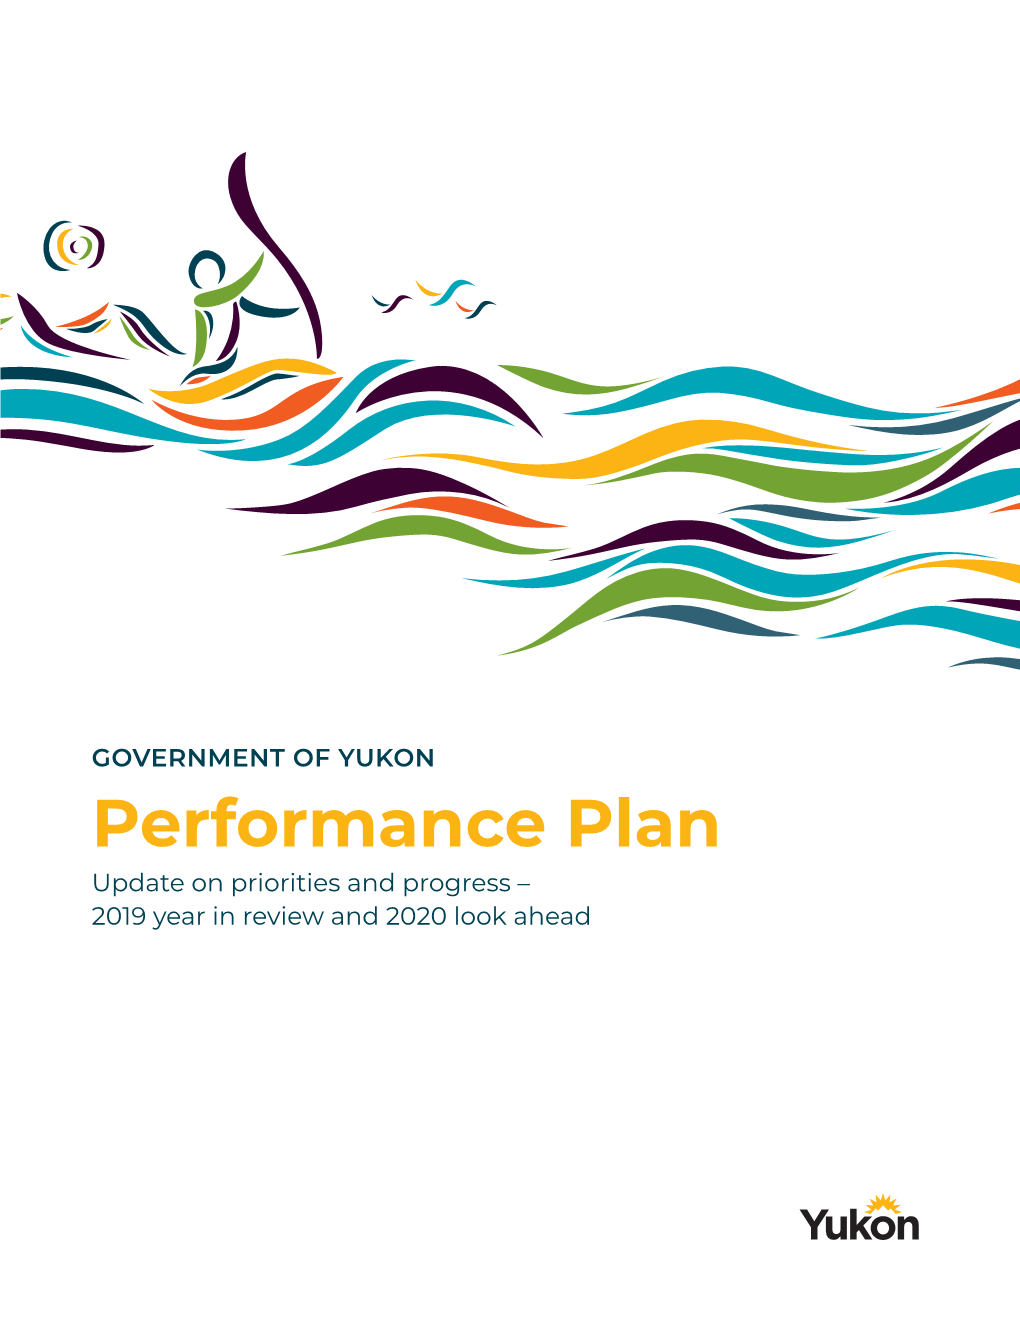 Performance Plan Update on Priorities and Progress – 2019 Year in Review and 2020 Look Ahead